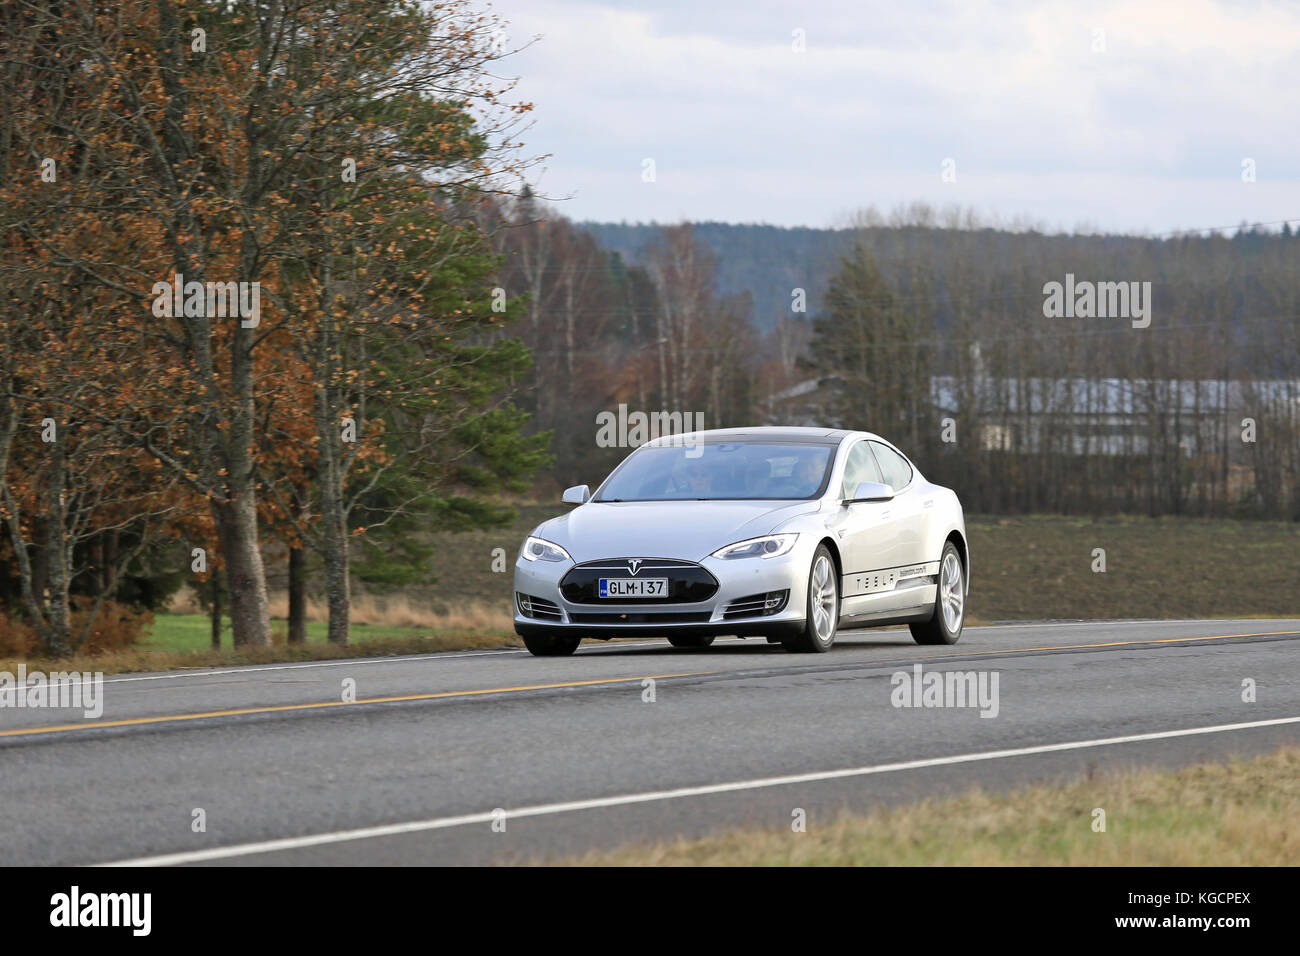 SALO, FINLAND - OCTOBER 31, 2015: Silver Tesla Model S electric car on the road in South of Finland. Tesla will build next generation maps through its Stock Photo